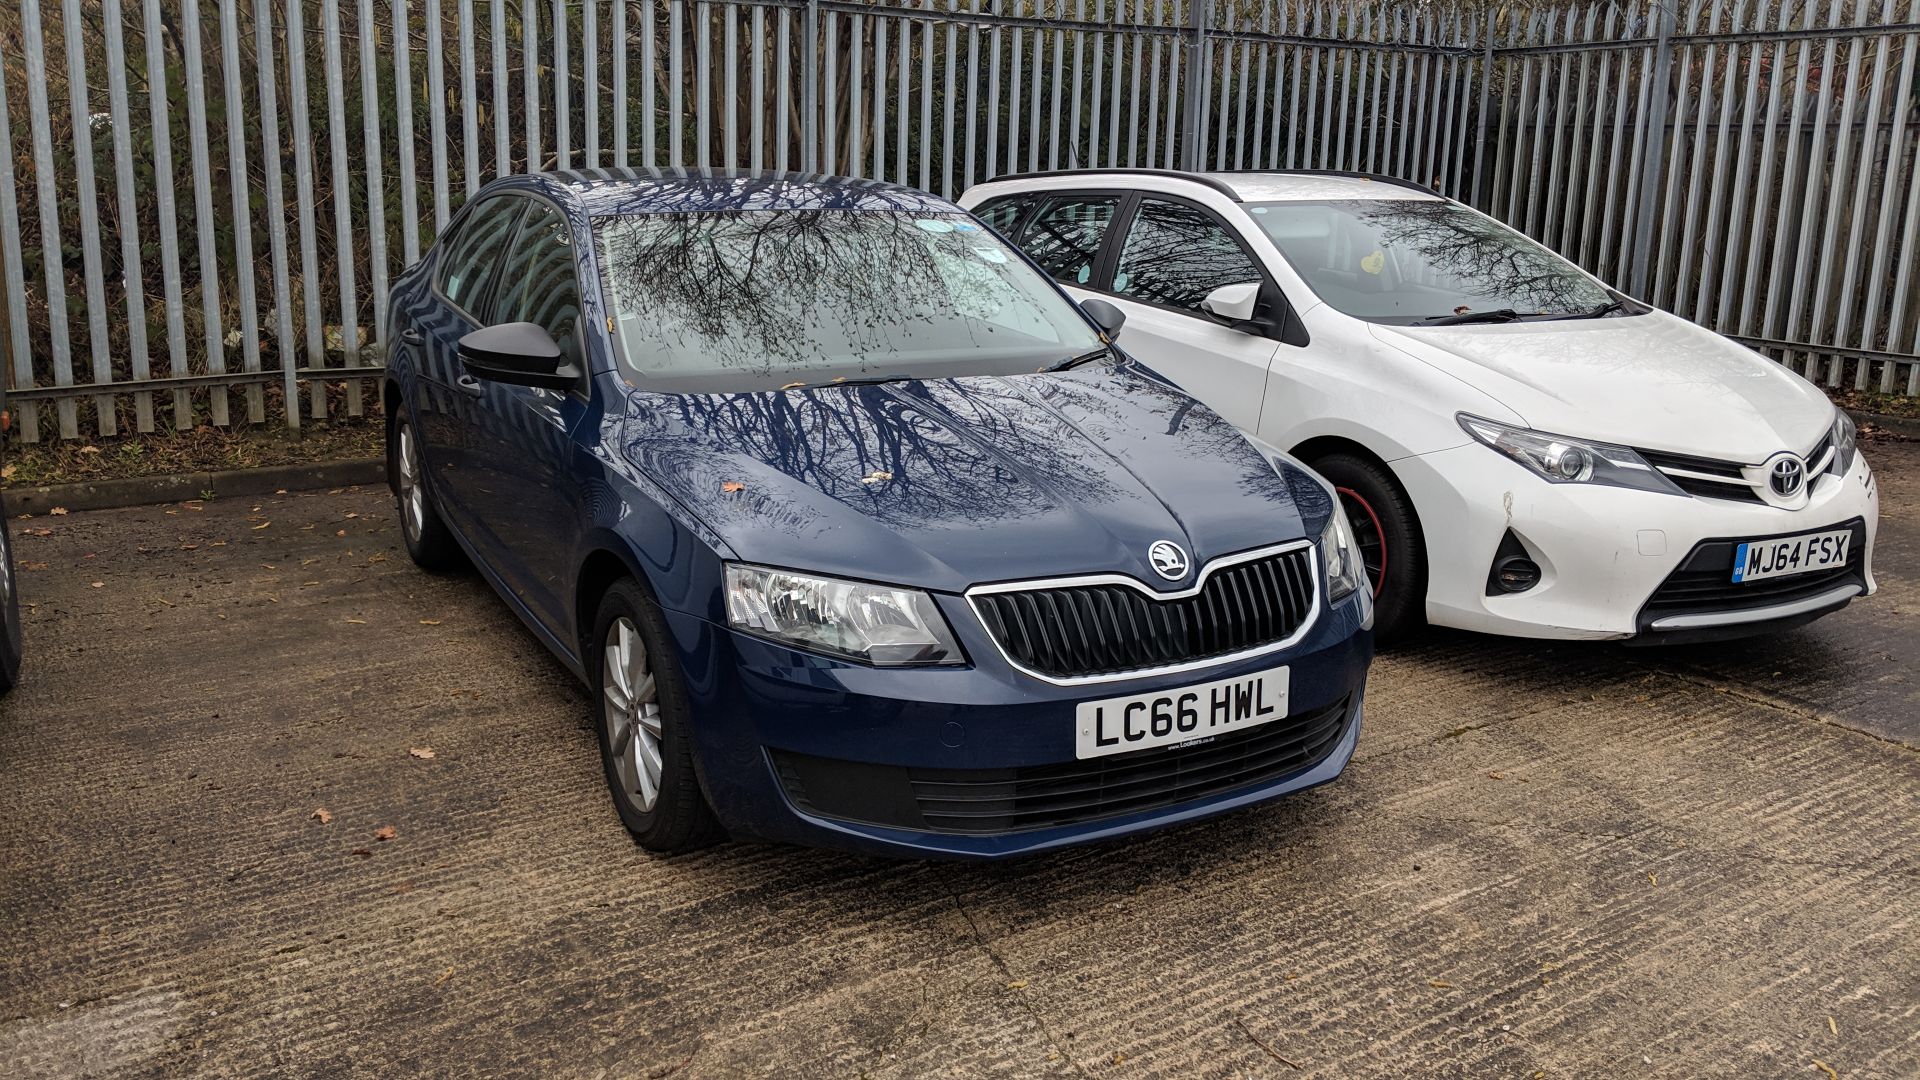 LC66 HWL Skoda Octavia S TDI S-A 1598cc diesel engine. Colour: Blue. First registered: 06.02.17. - Image 8 of 47